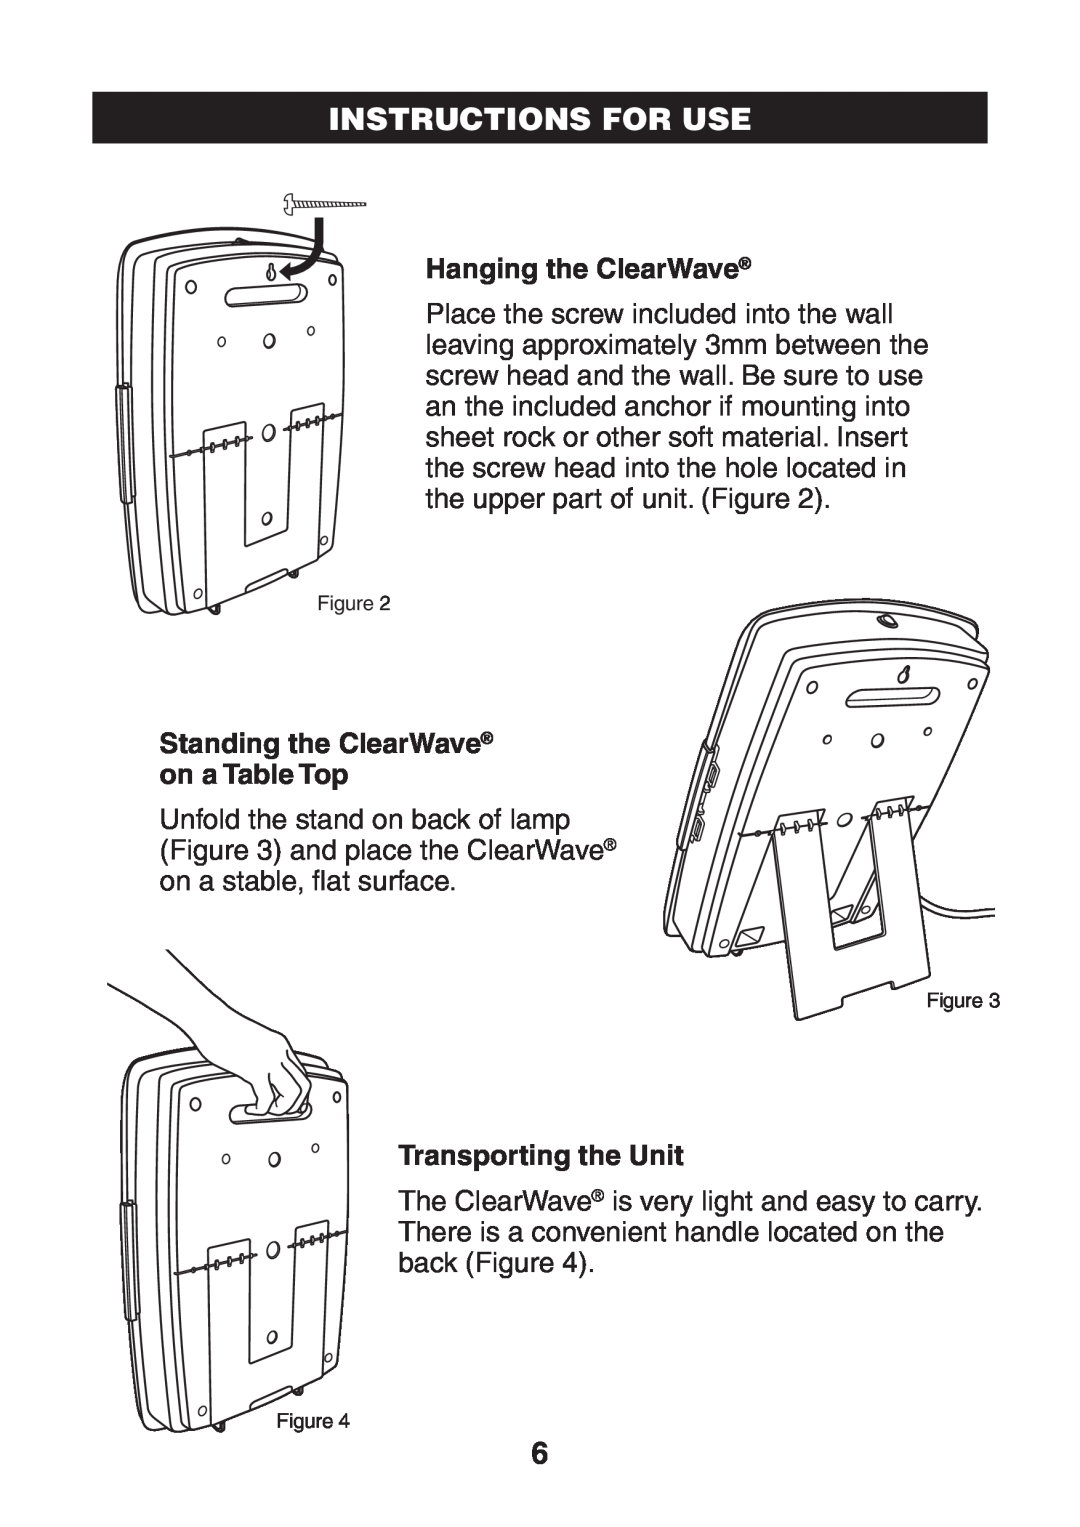 Verilux CWST1 Hanging the ClearWave, Standing the ClearWave on a Table Top, Transporting the Unit, Instructions For Use 